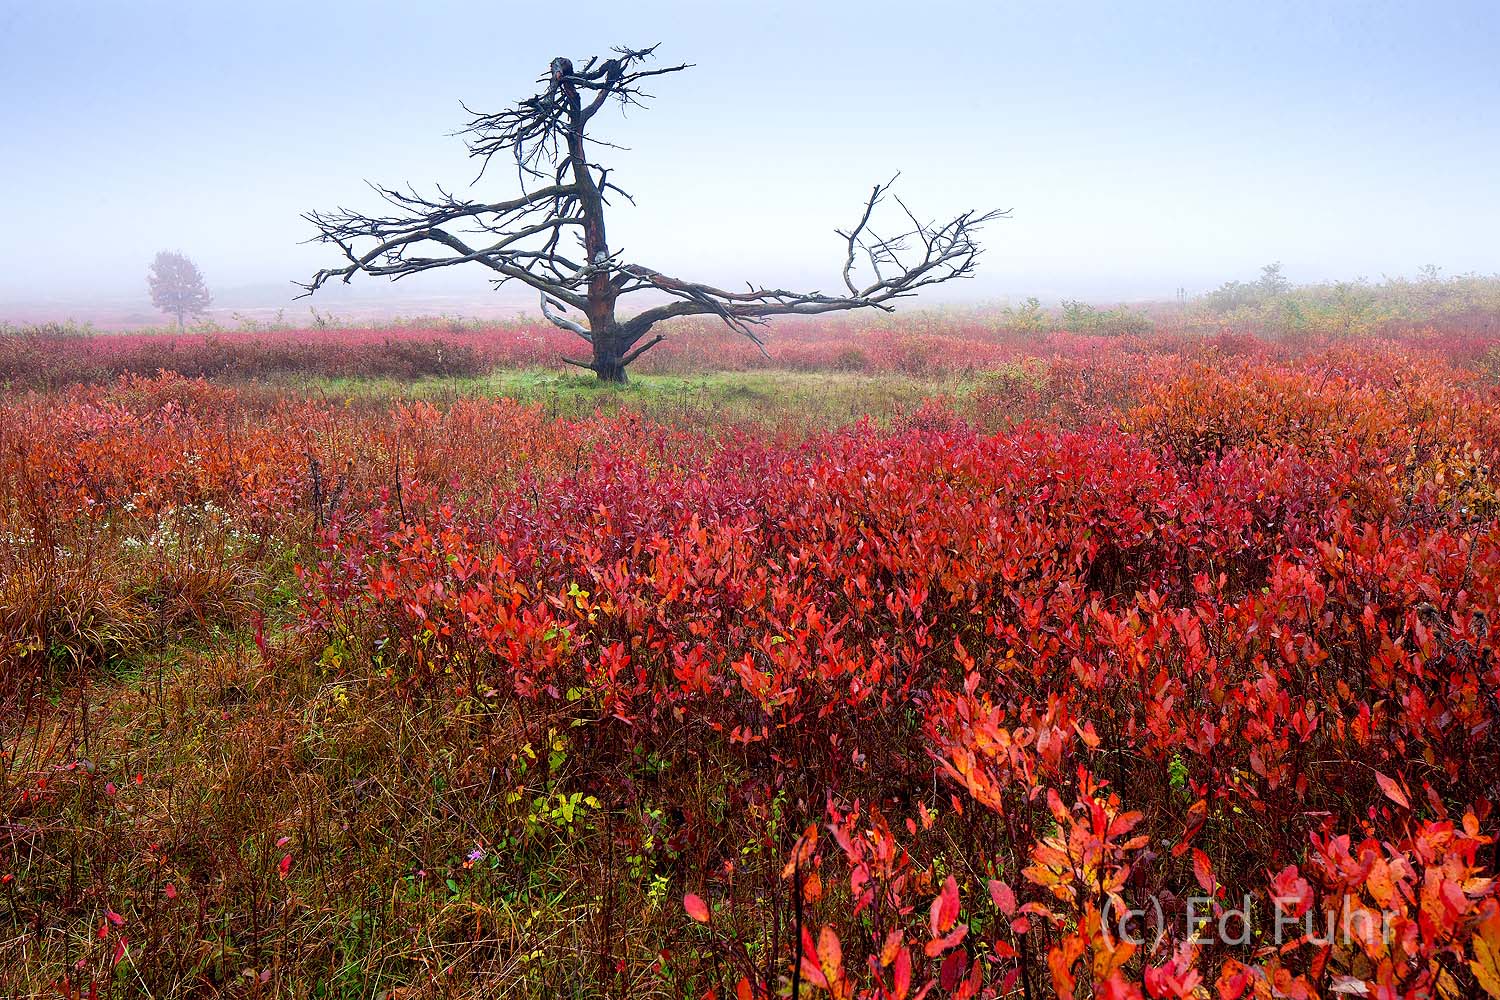 In autumn, the berry bushes that nourish birds and wildlife in summer, provide a rich red carpet in autumn.